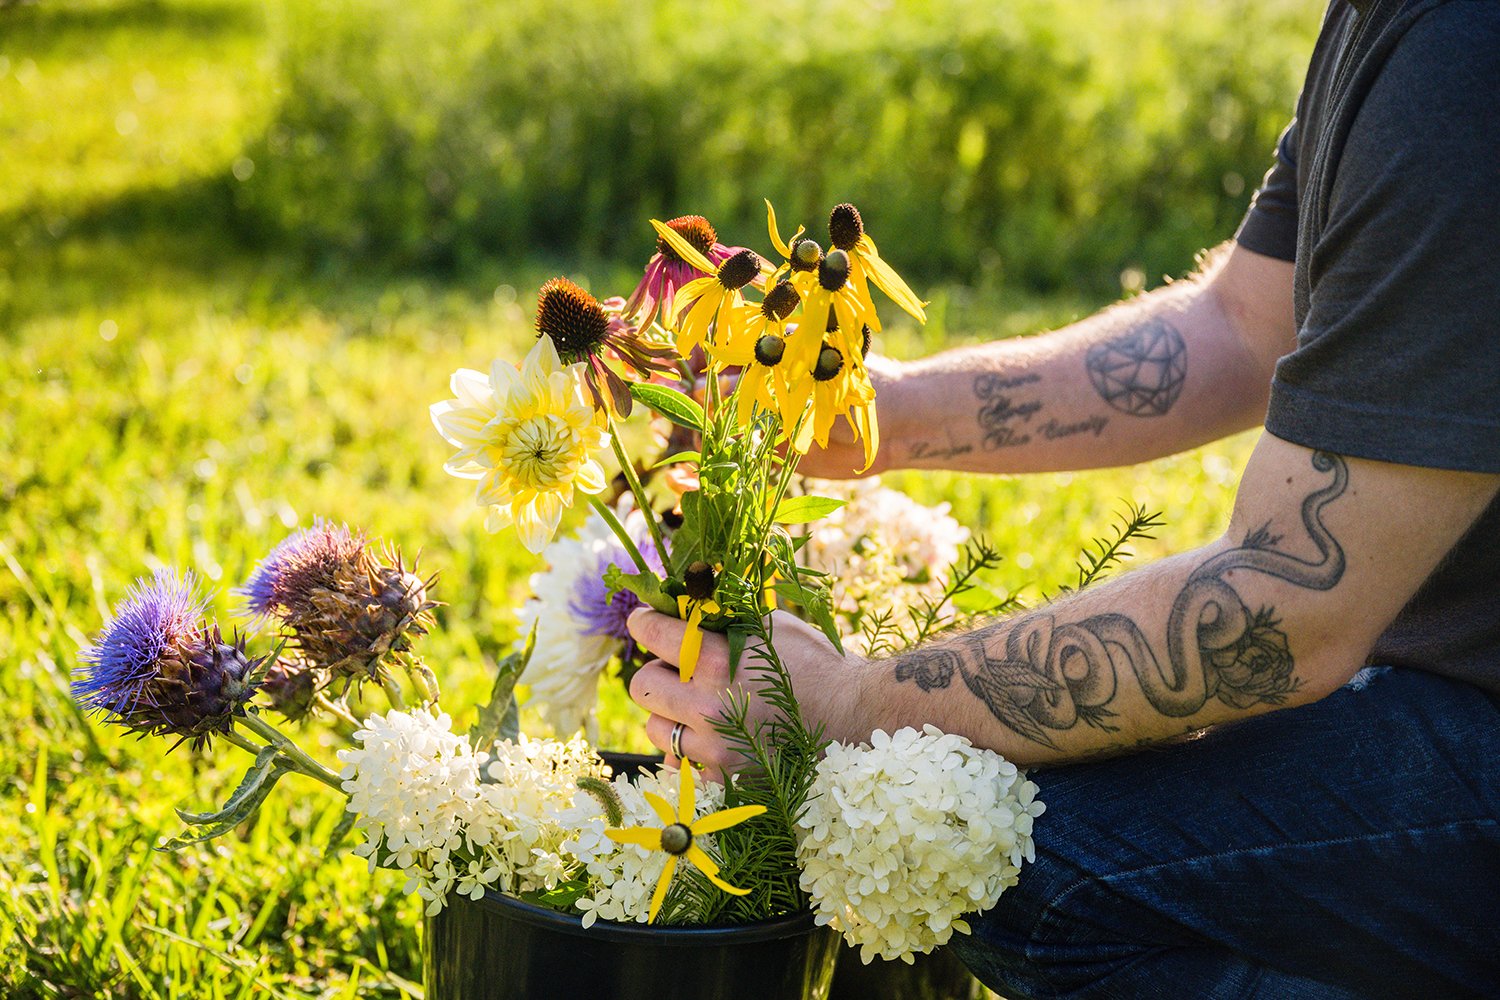 A close up shot of a person’s arms taking out a few flowers out of a bucket during a photo session at Fae Cottage Flower Farm.